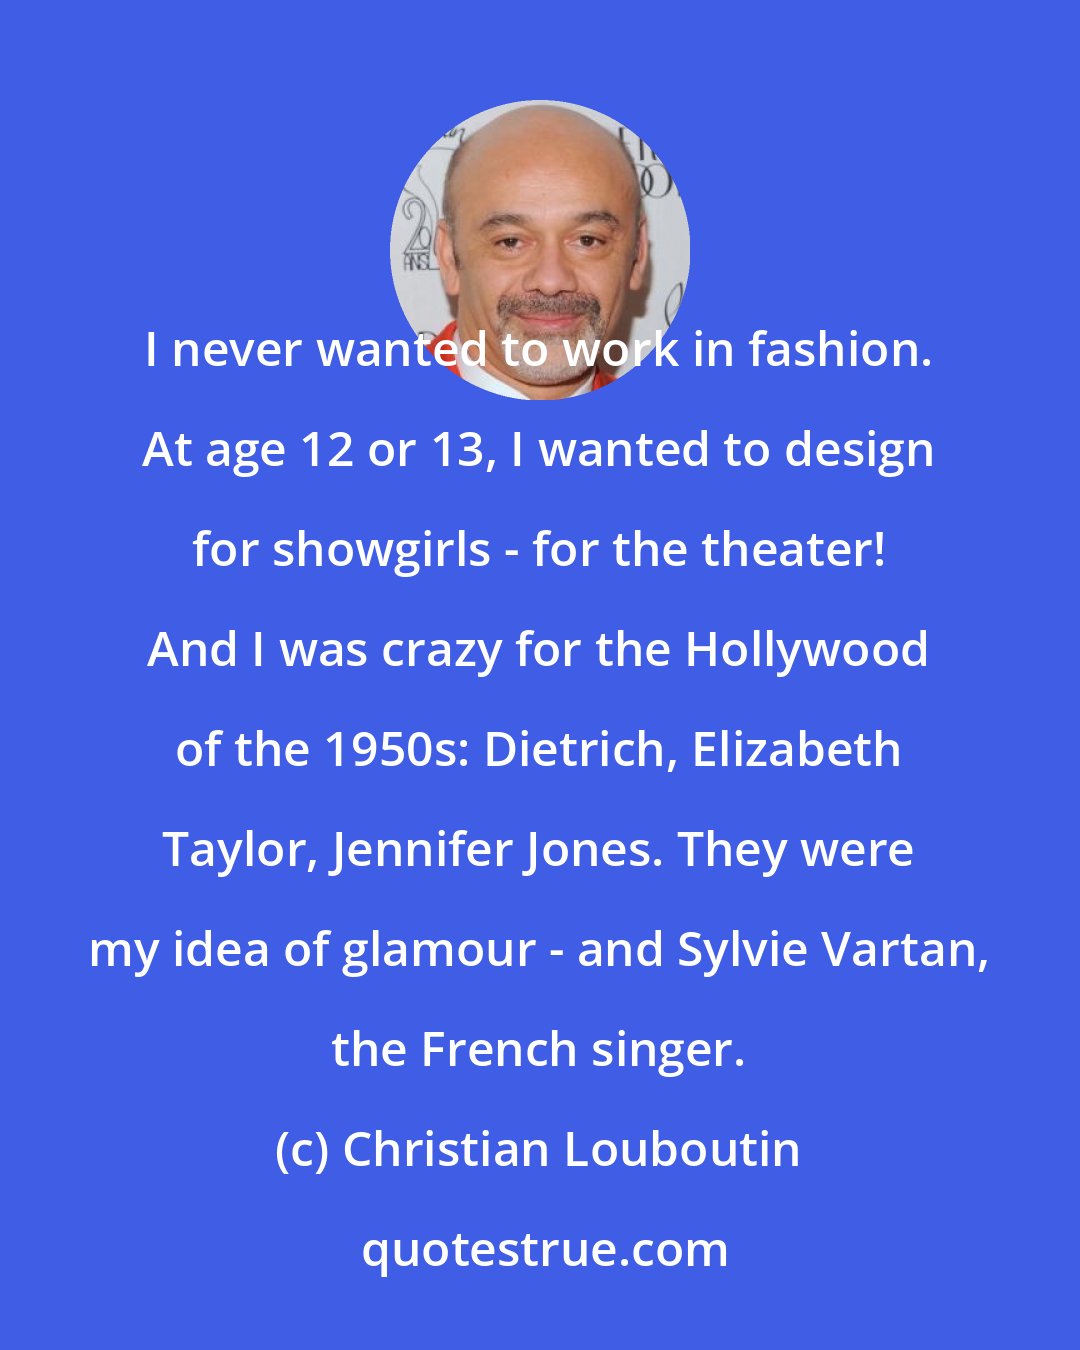 Christian Louboutin: I never wanted to work in fashion. At age 12 or 13, I wanted to design for showgirls - for the theater! And I was crazy for the Hollywood of the 1950s: Dietrich, Elizabeth Taylor, Jennifer Jones. They were my idea of glamour - and Sylvie Vartan, the French singer.